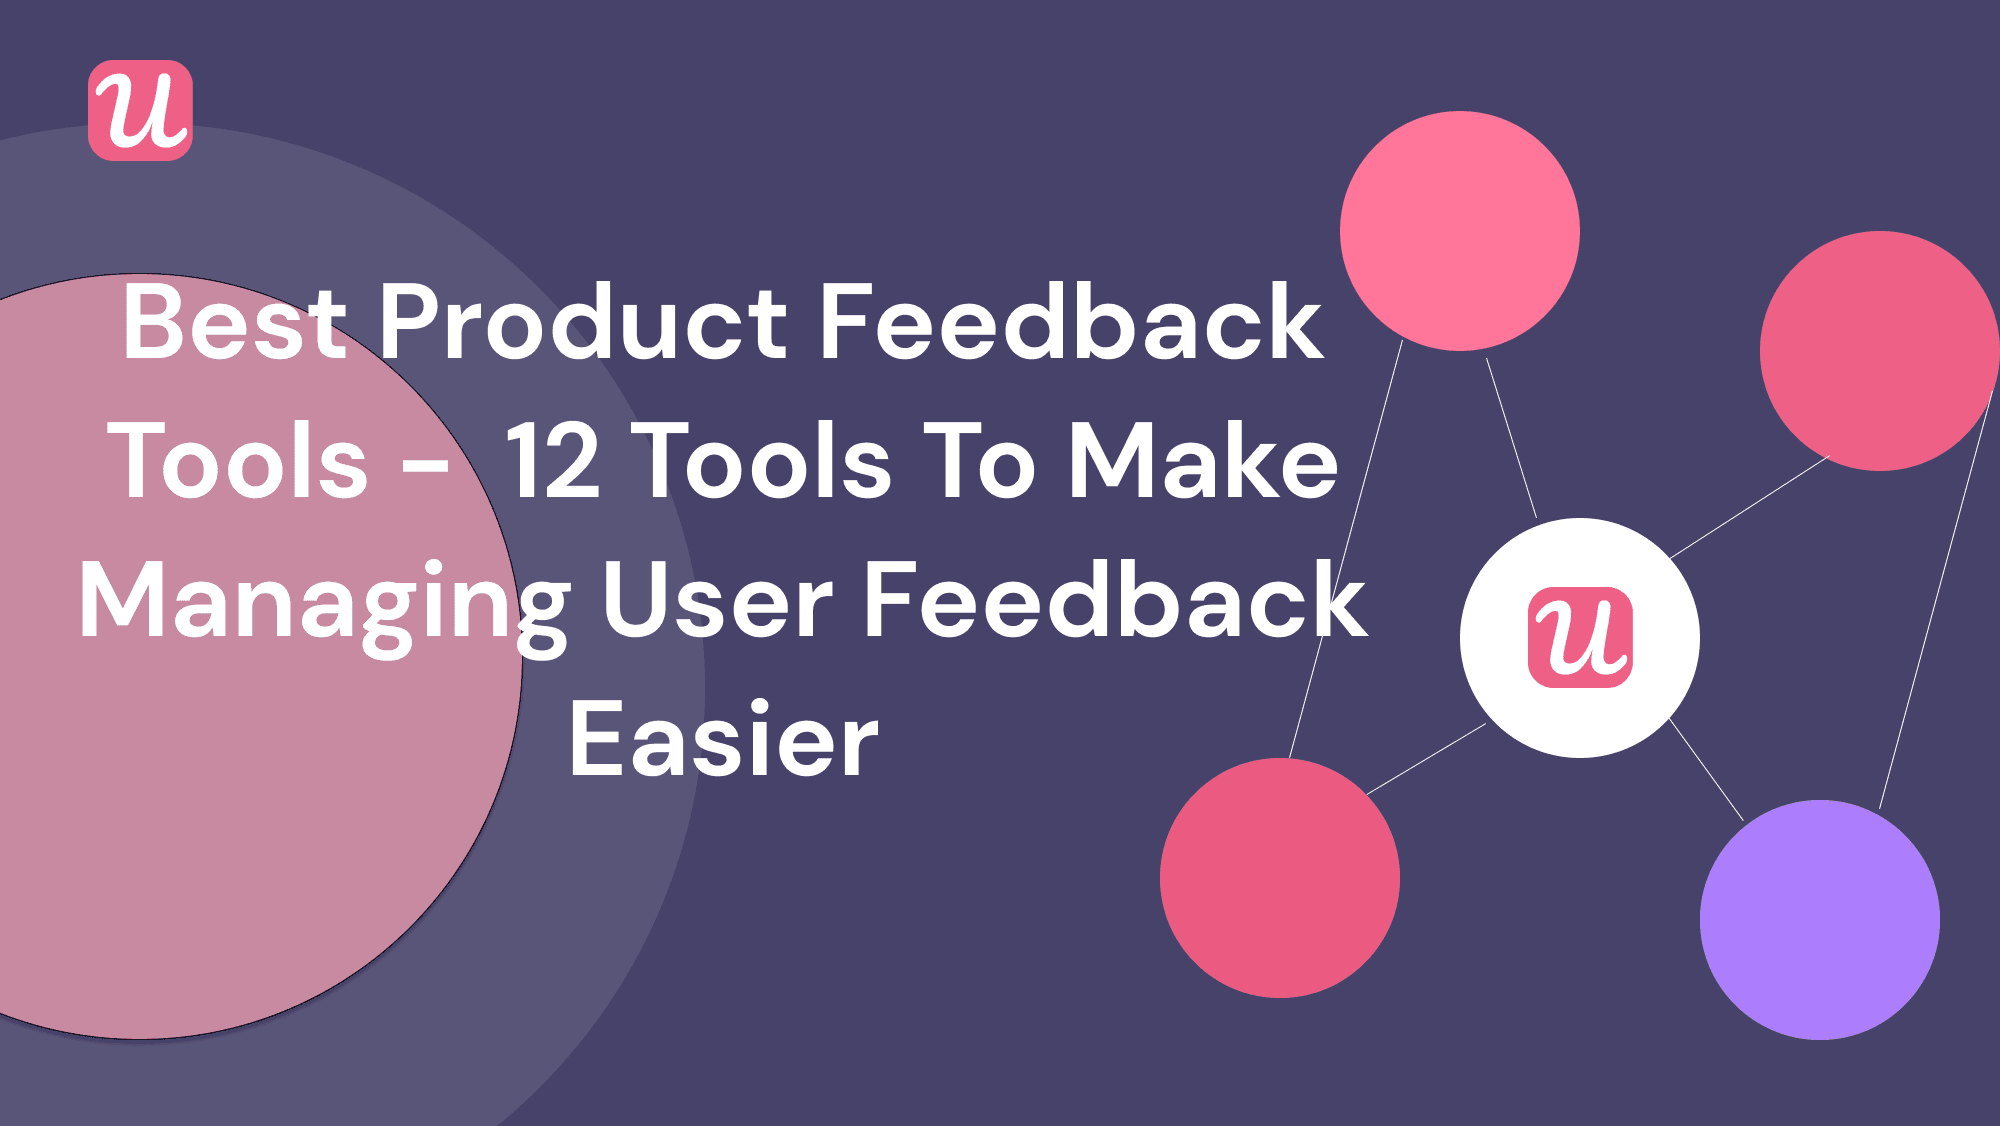 The 12 Best Product Feedback Tools To Manage User Feedback